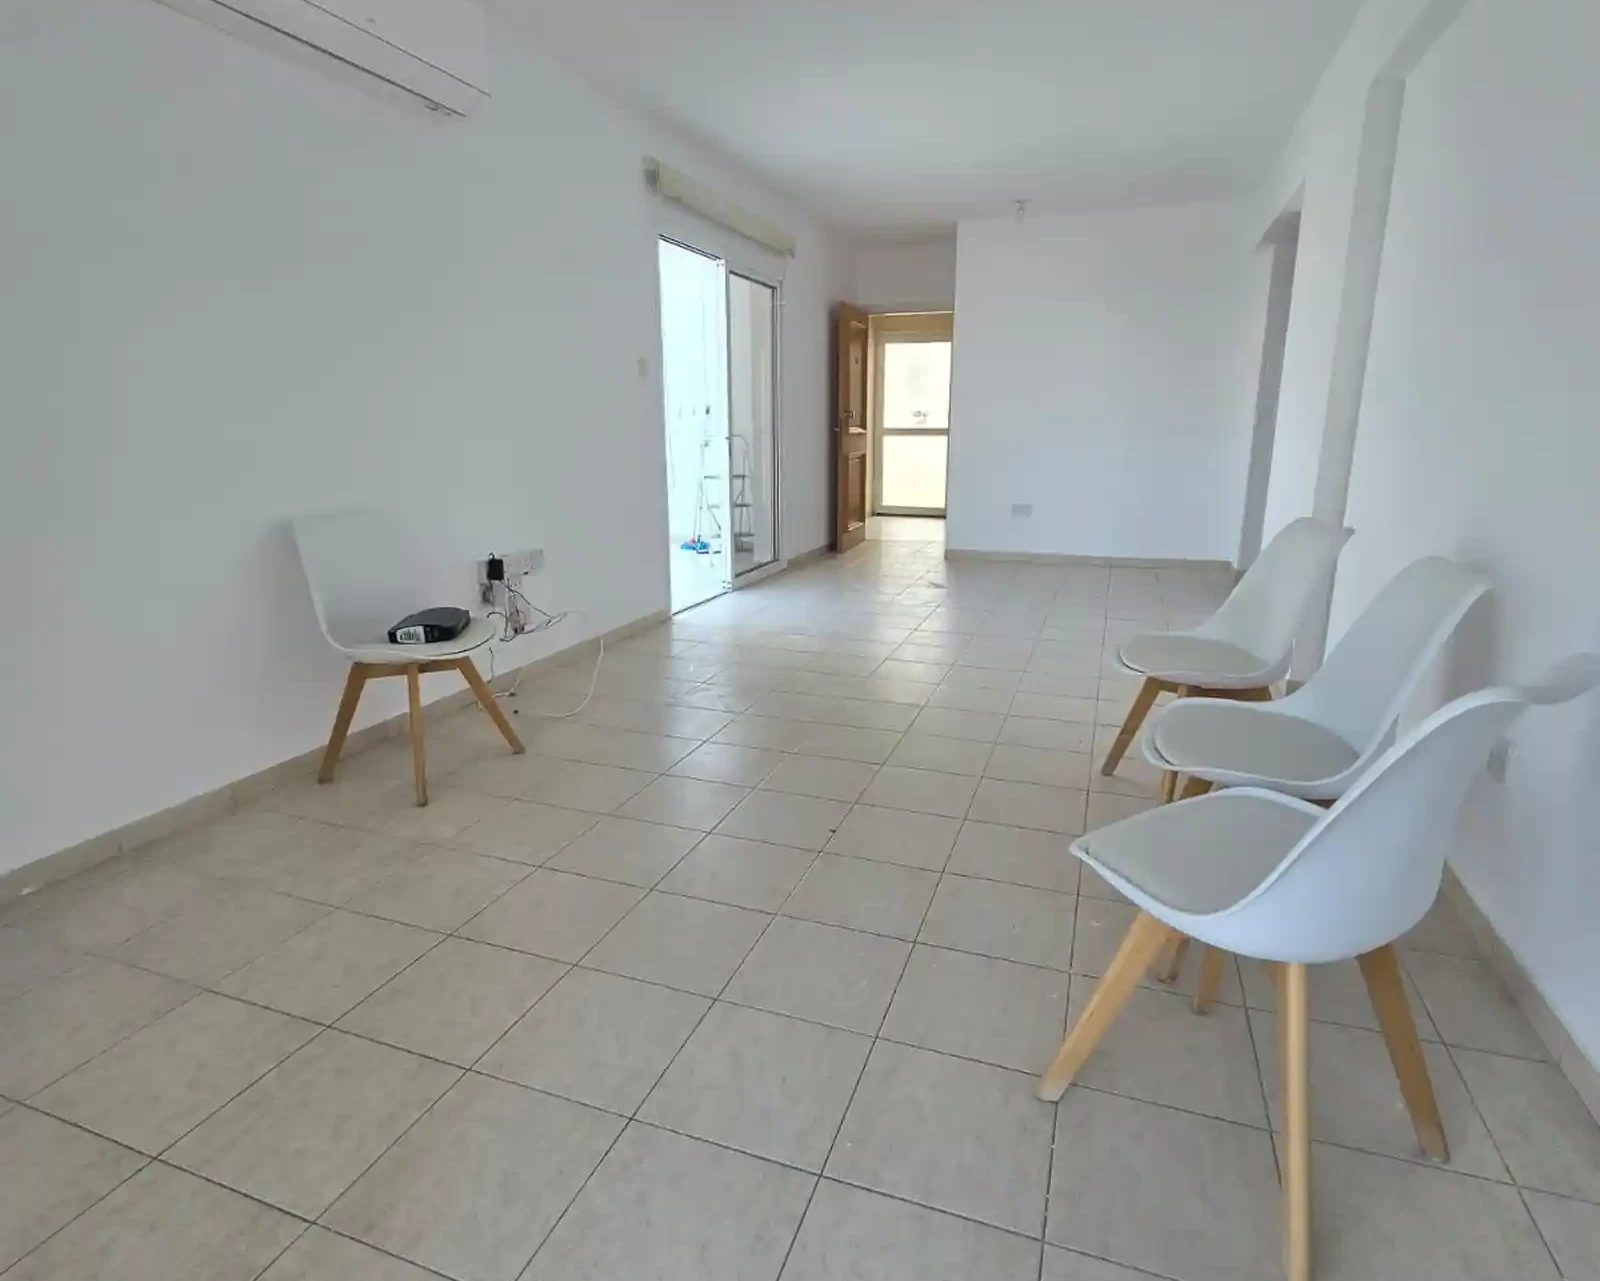 3-bedroom apartment fоr sаle €230.000, image 1